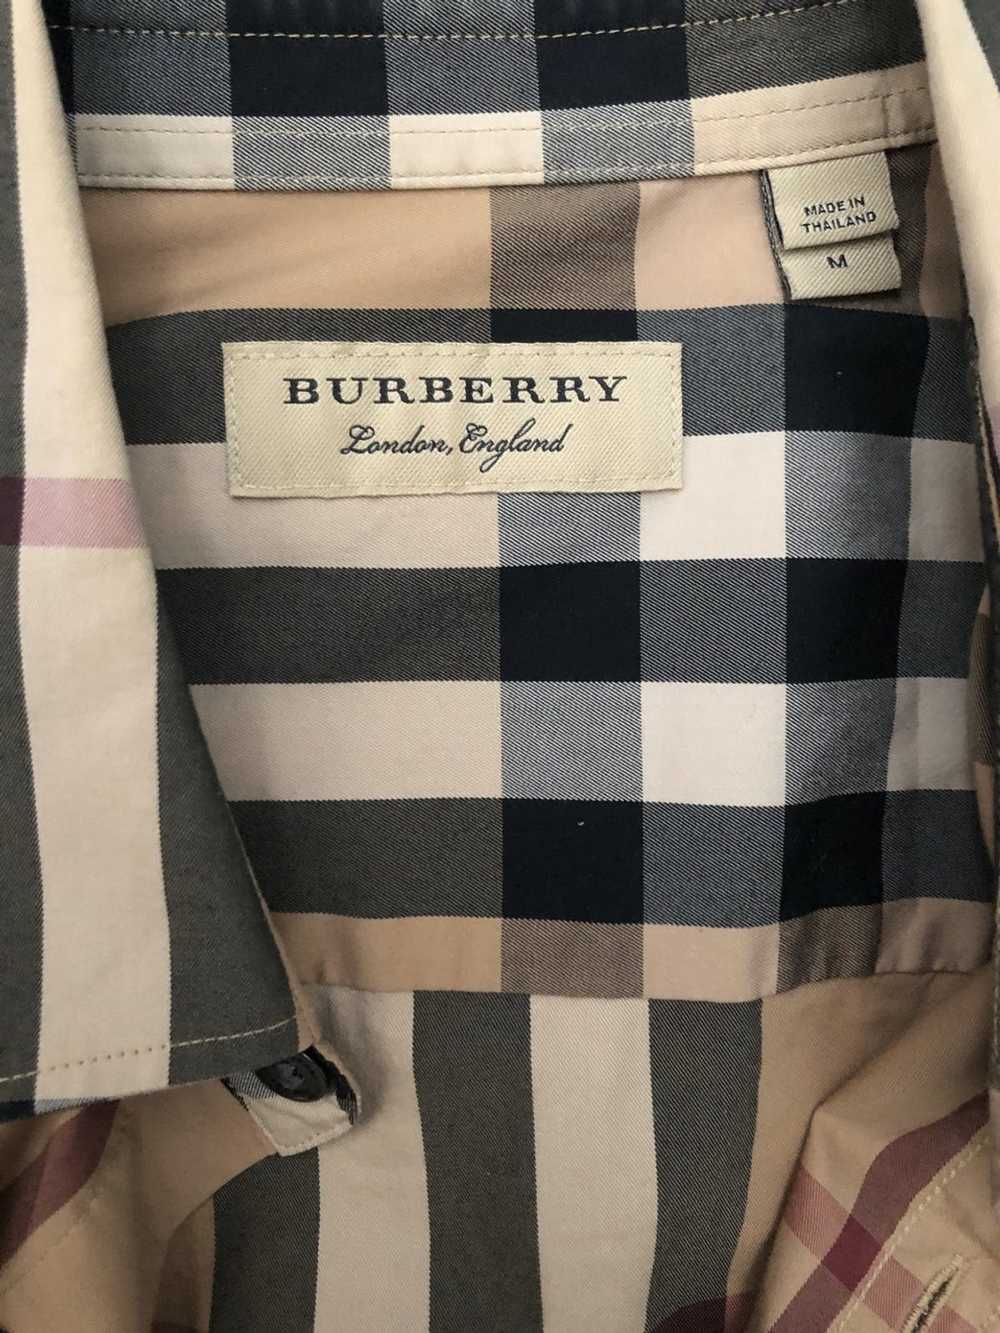 Burberry Burberry LongSleeve Button Up - image 4